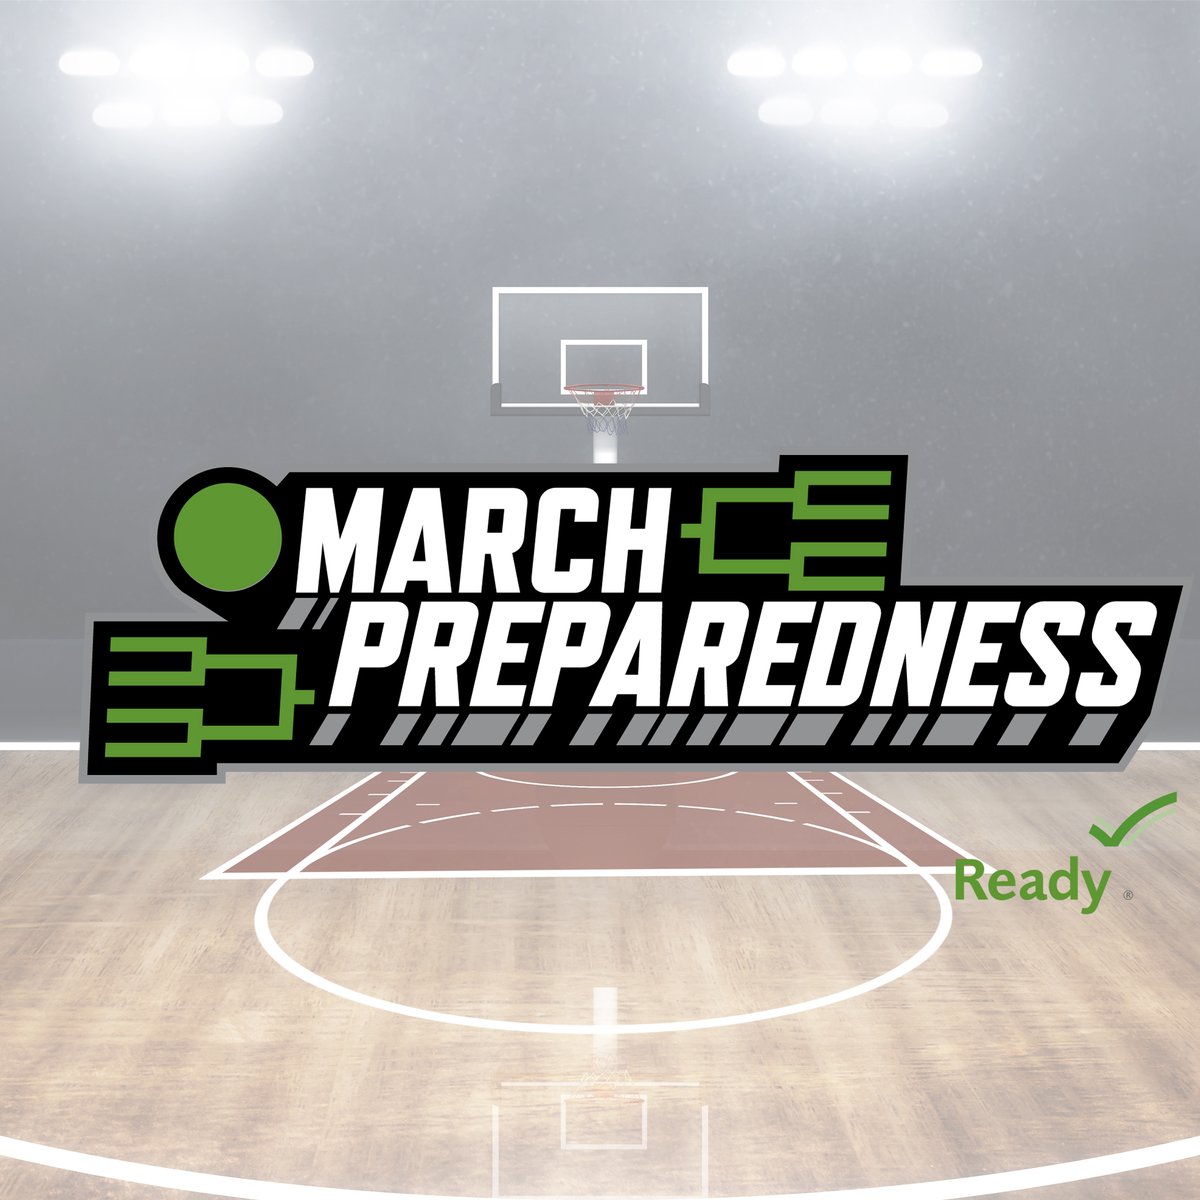 🏀✅ While you fill out your brackets, remember to protect your home team! 🏡

Create a family emergency plan for you & your loved ones this month! #MarchPreparedness 

🔗: ready.gov/plan @Readygov